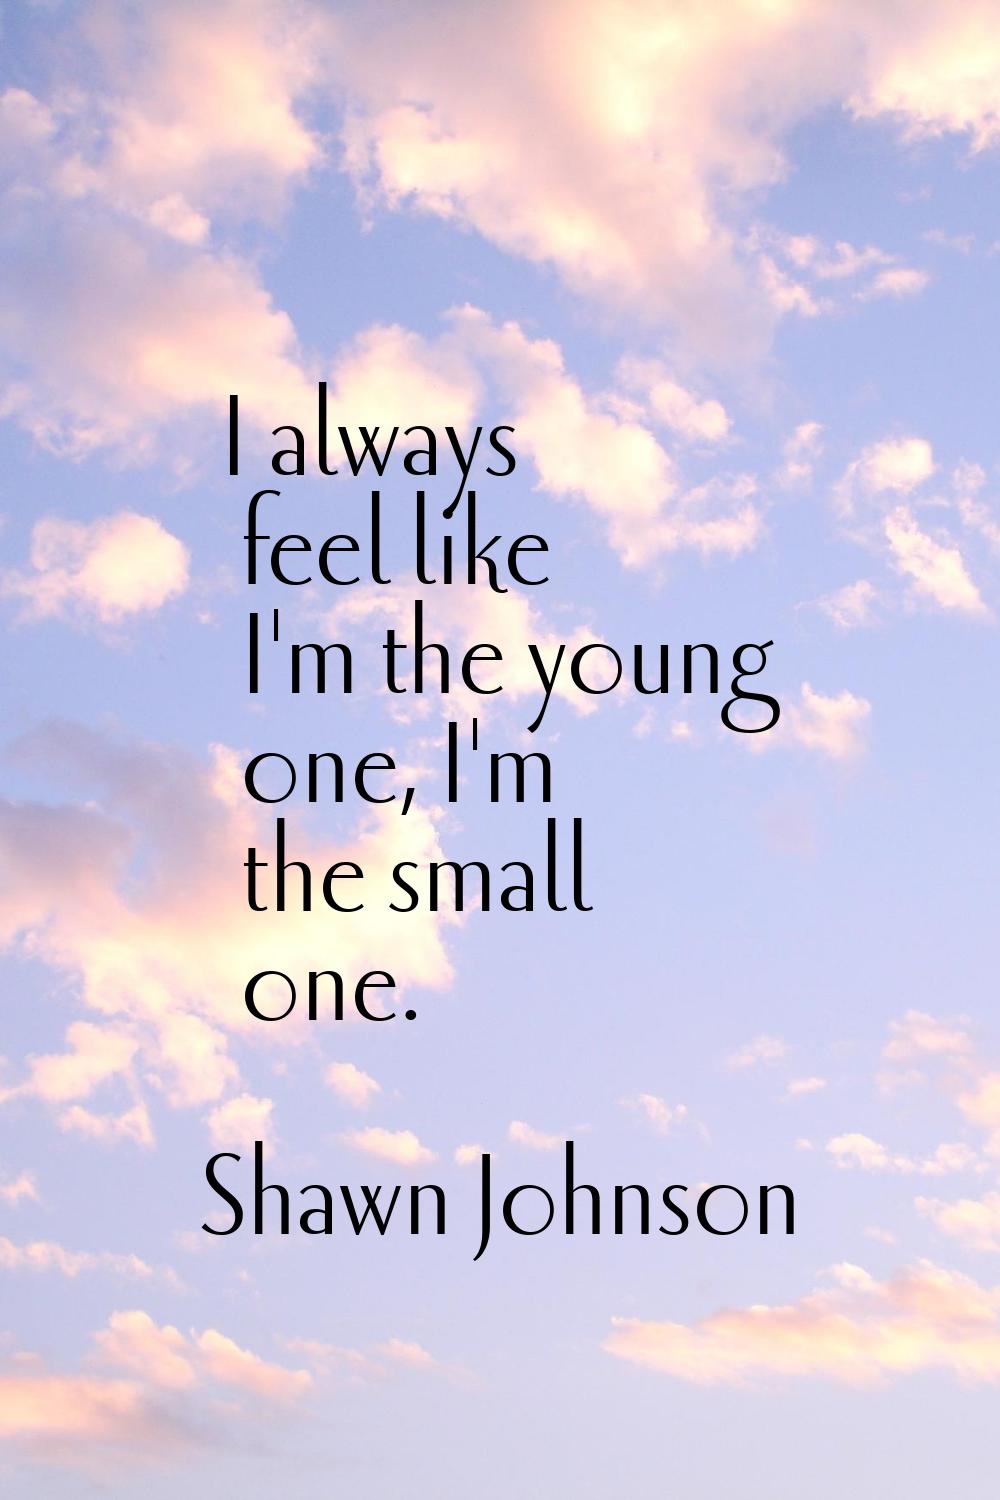 I always feel like I'm the young one, I'm the small one.